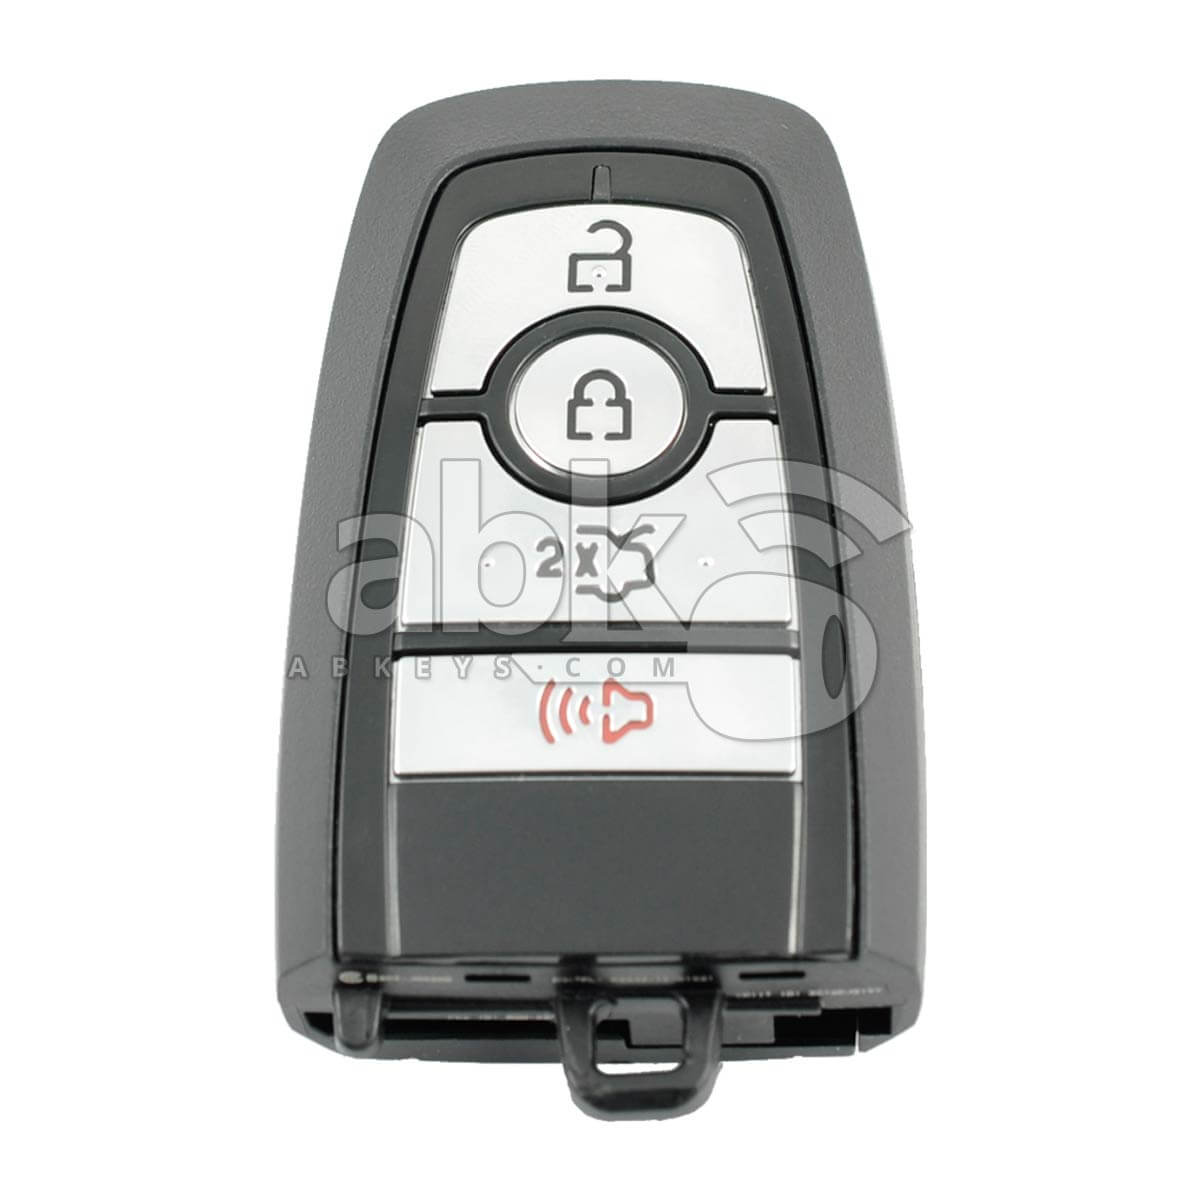 Ford 2017+ Smart Key Cover 4Buttons - ABK-1768 - ABKEYS.COM